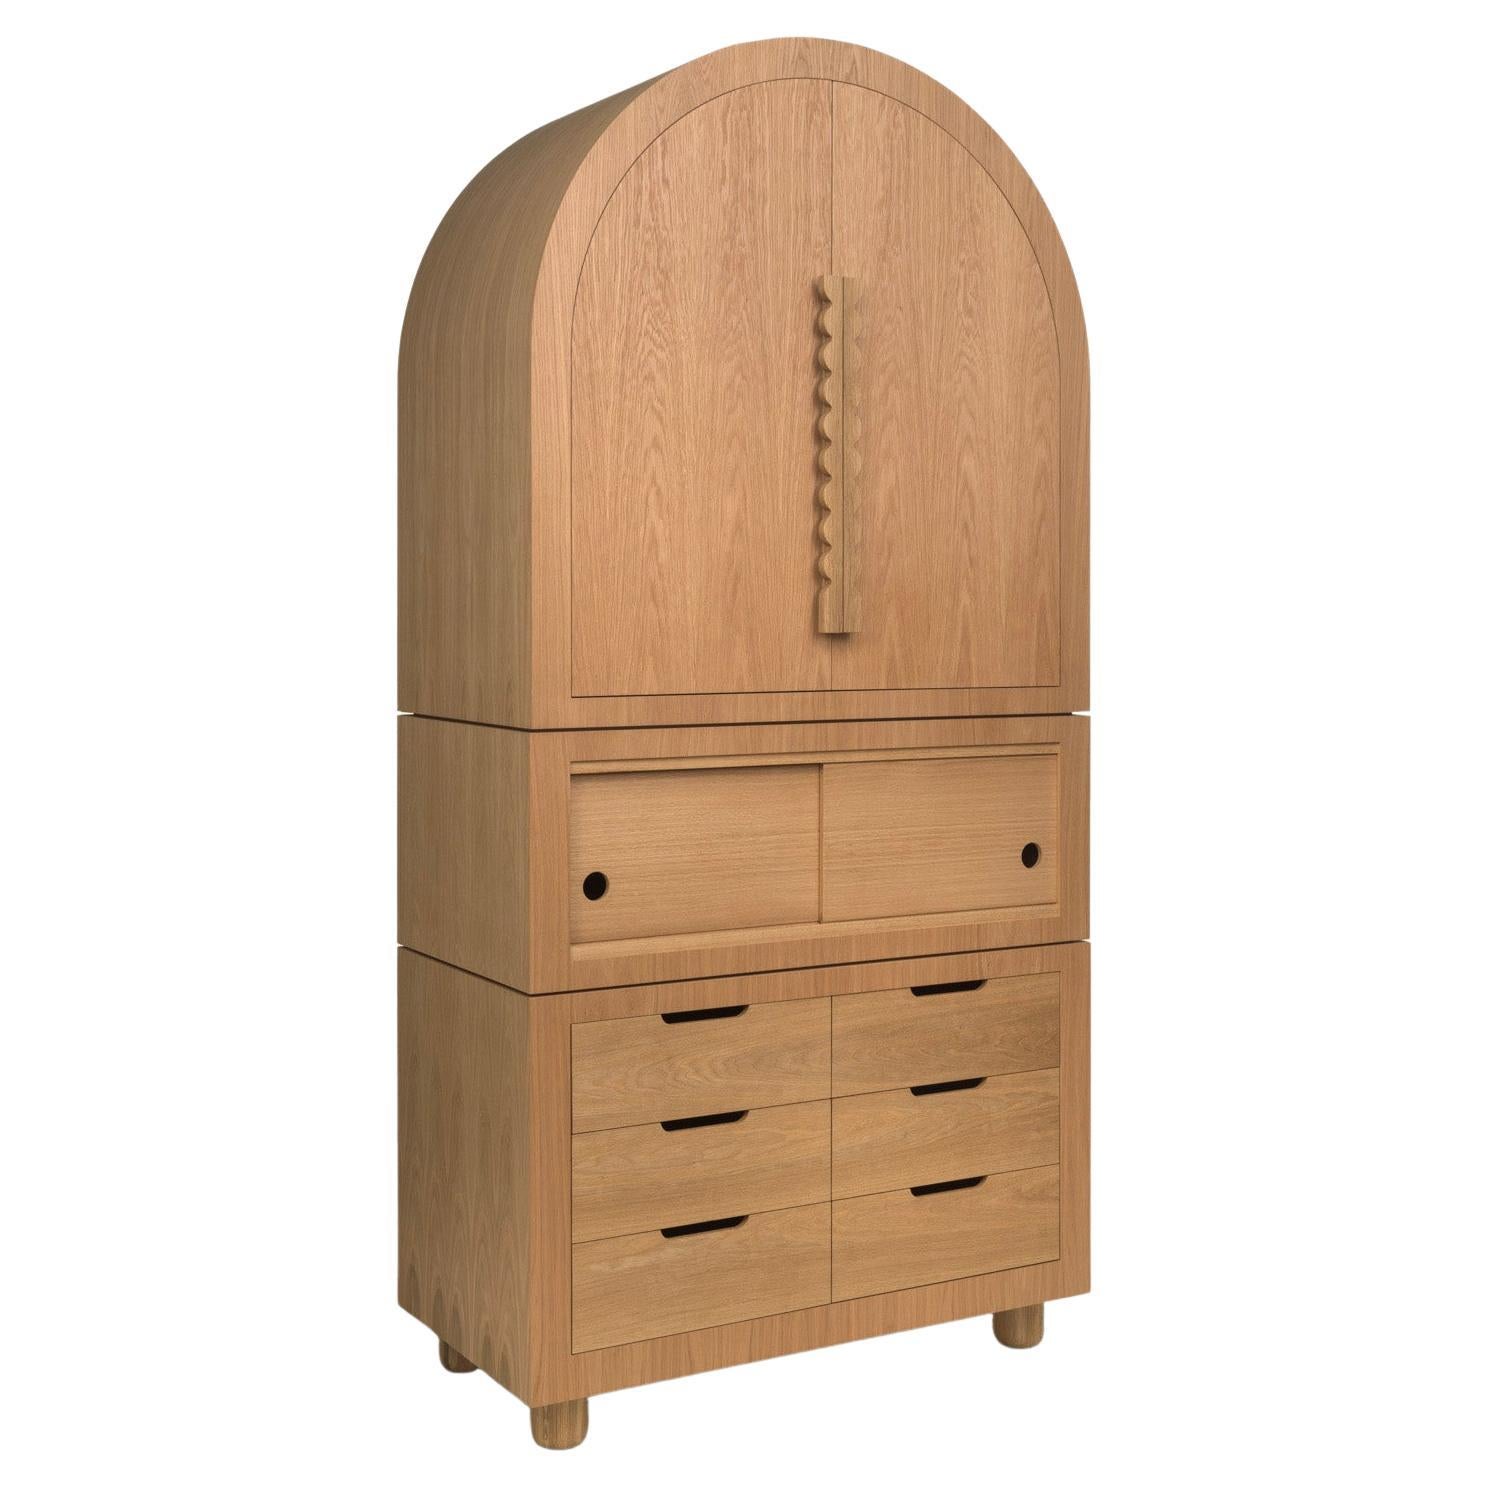 Jackson Highboy Modern Art Deco and Memphis Inspired Armoire in White Oak